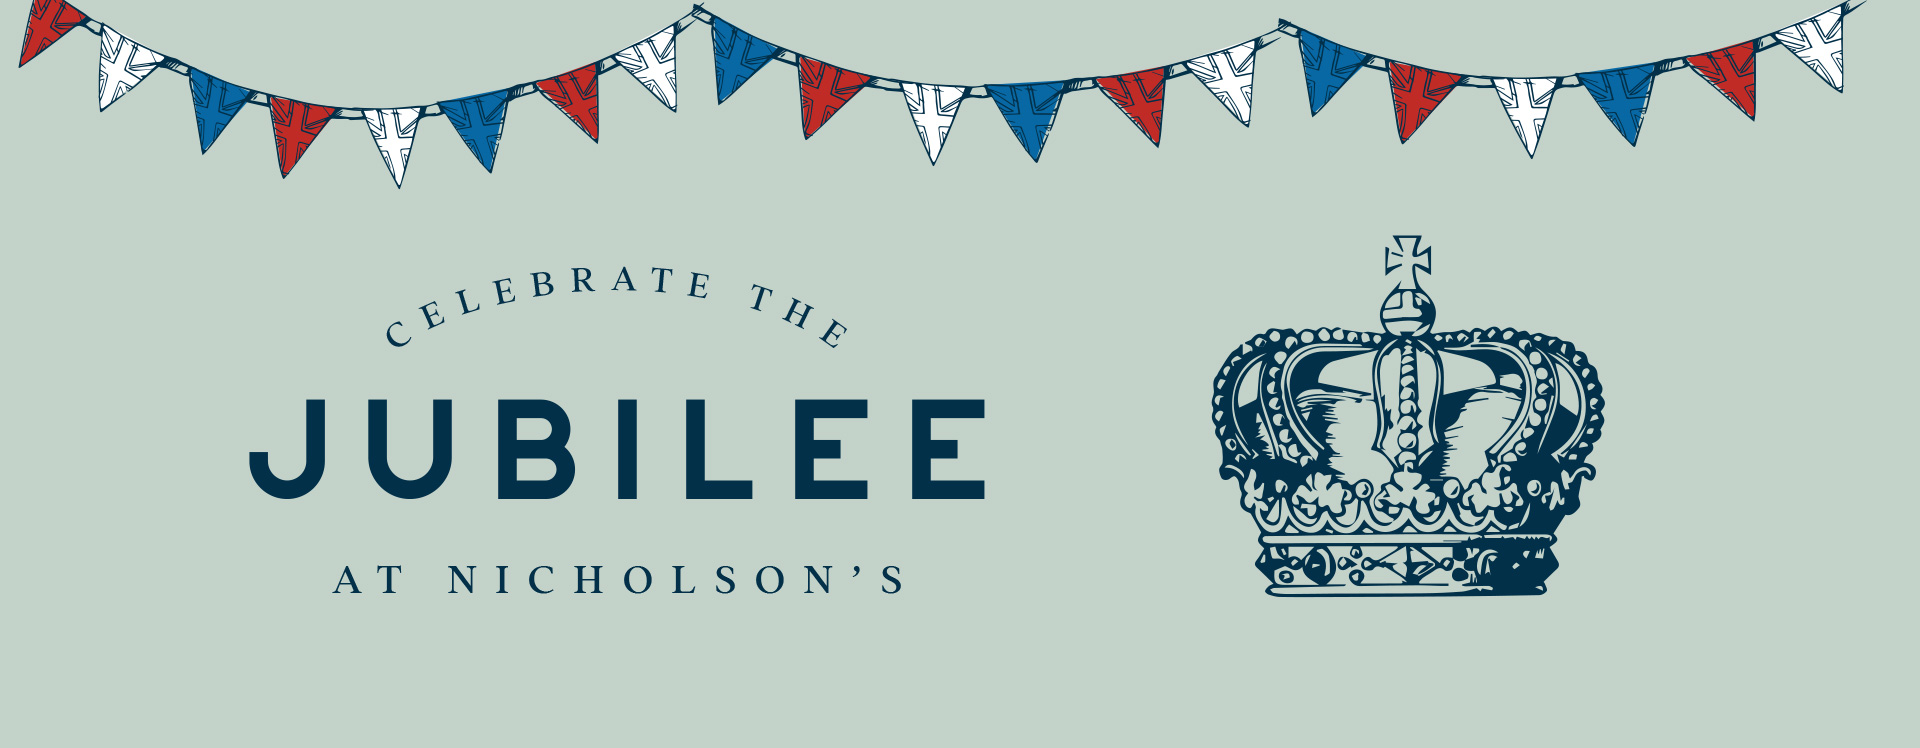 Jubilee at The Chequers